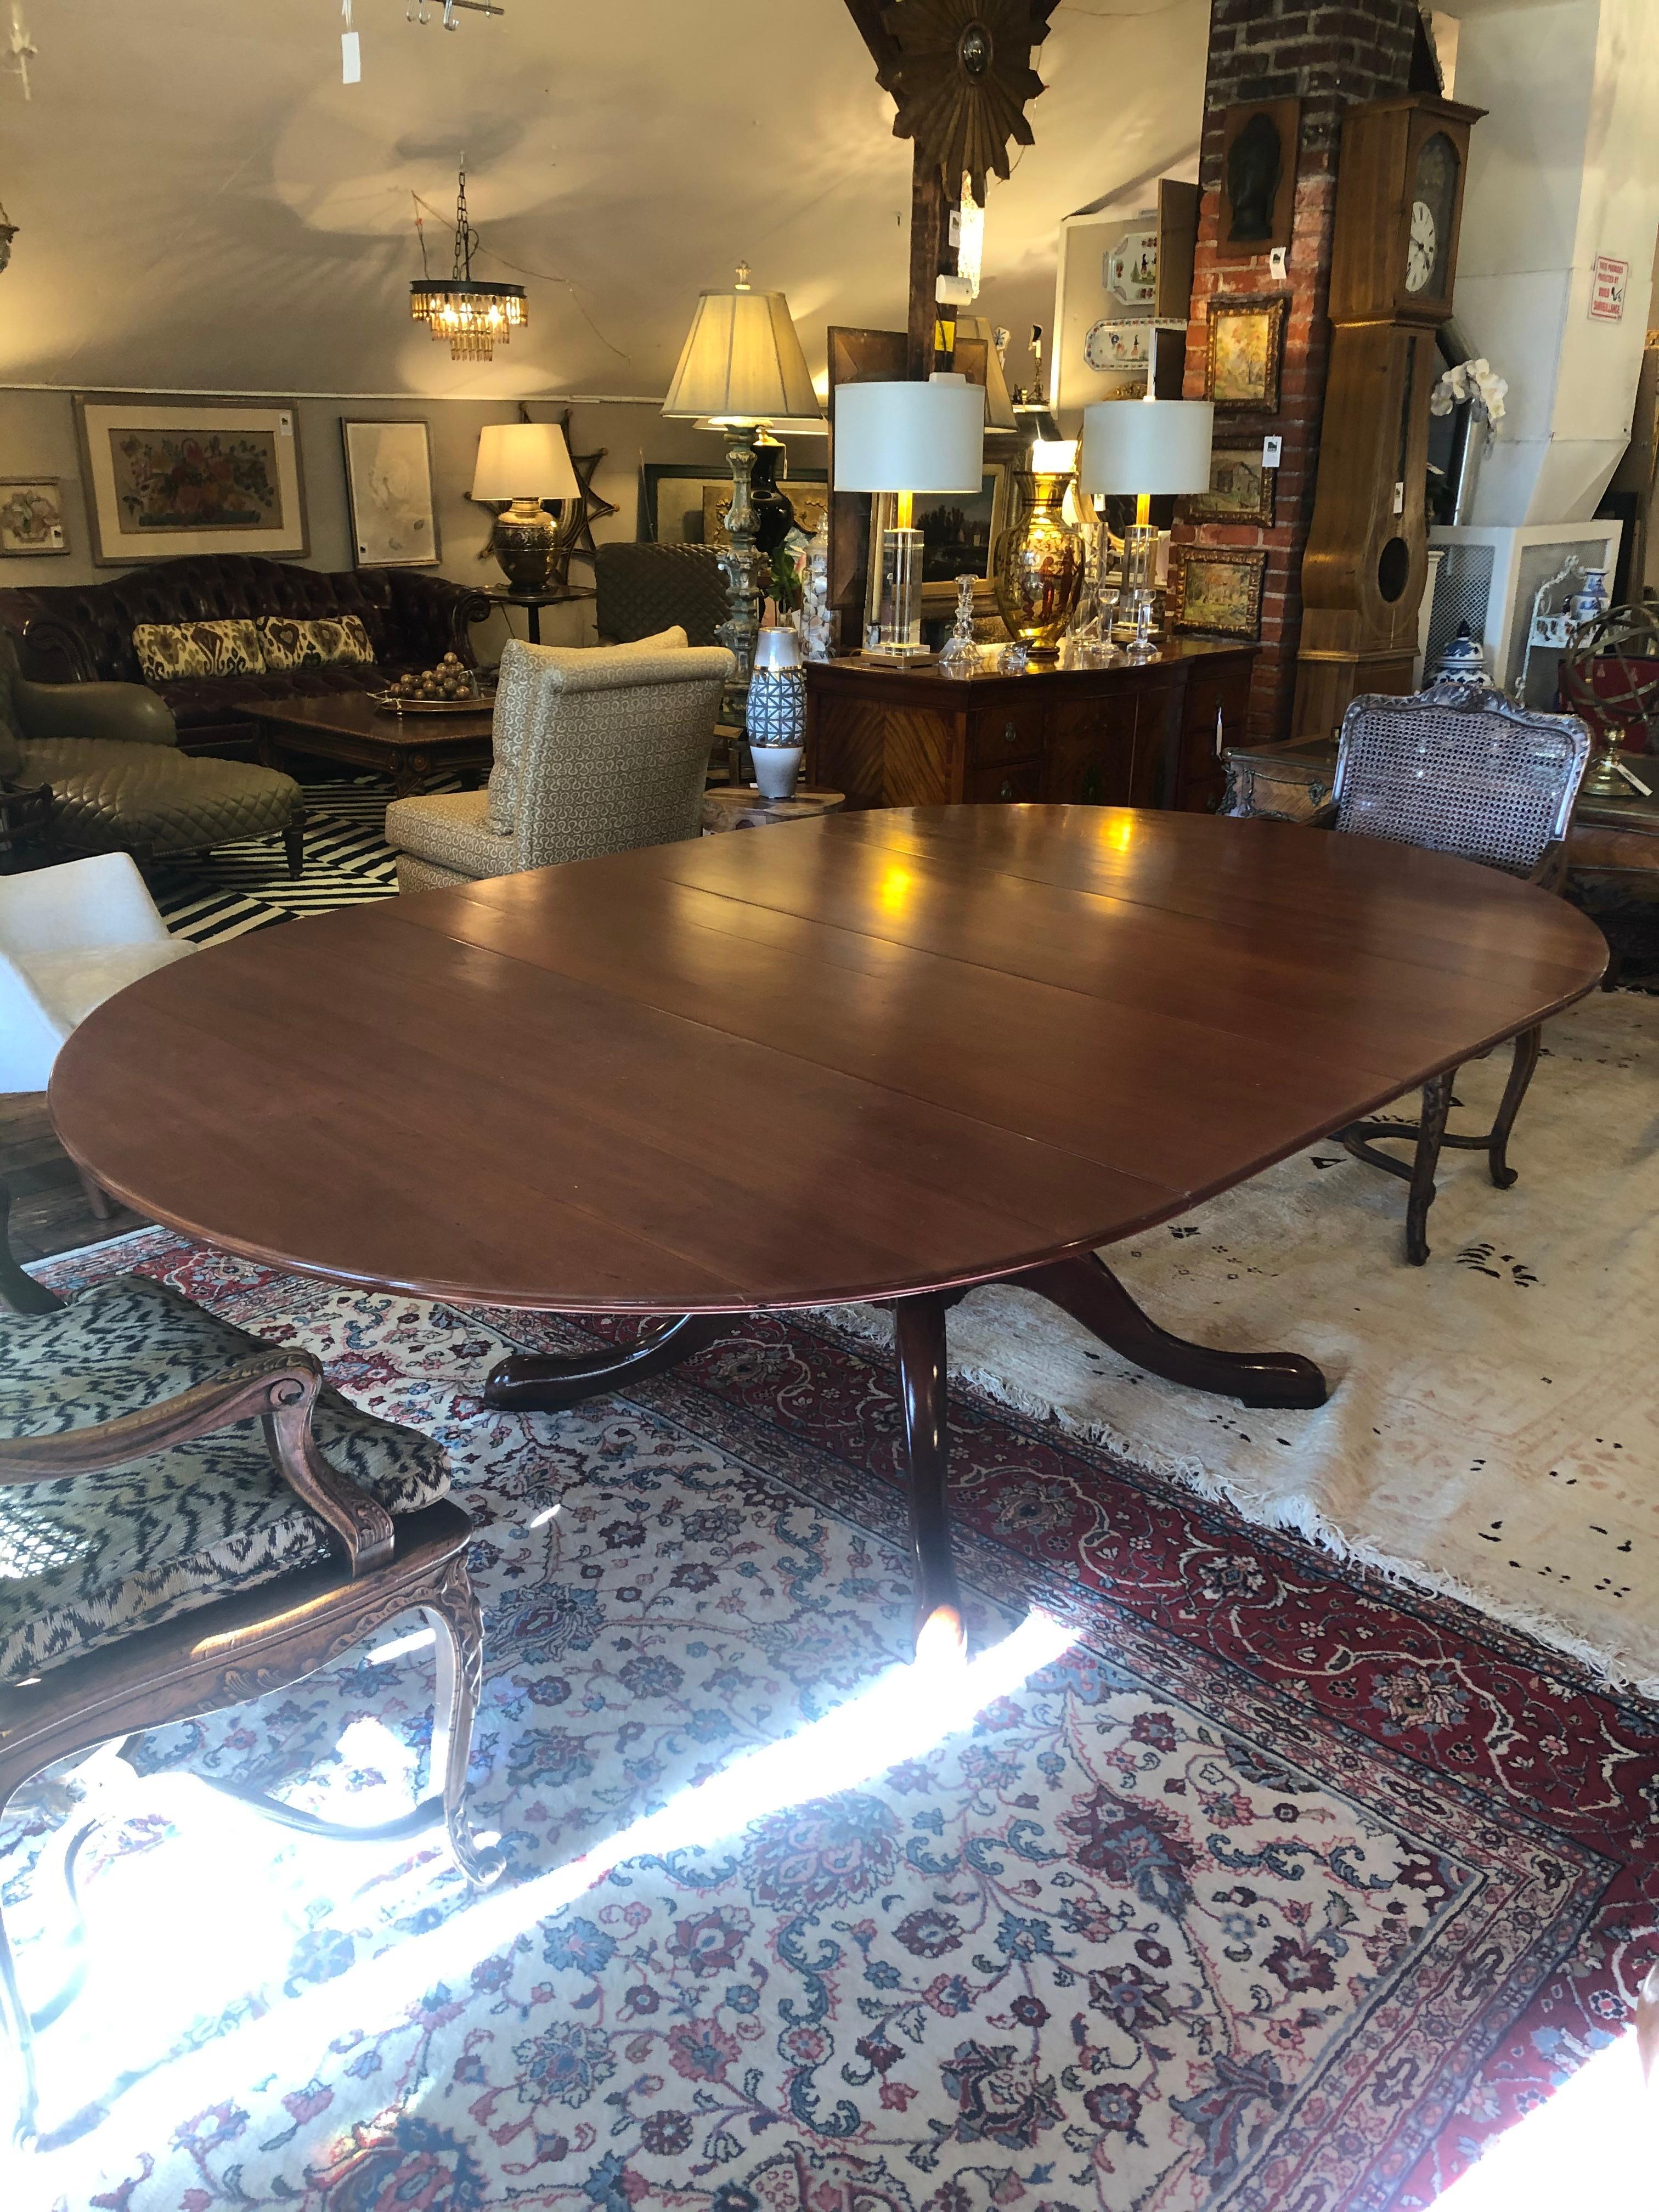 Classic Traditional Round Cherry Dining Table Extending to Large Oval 4